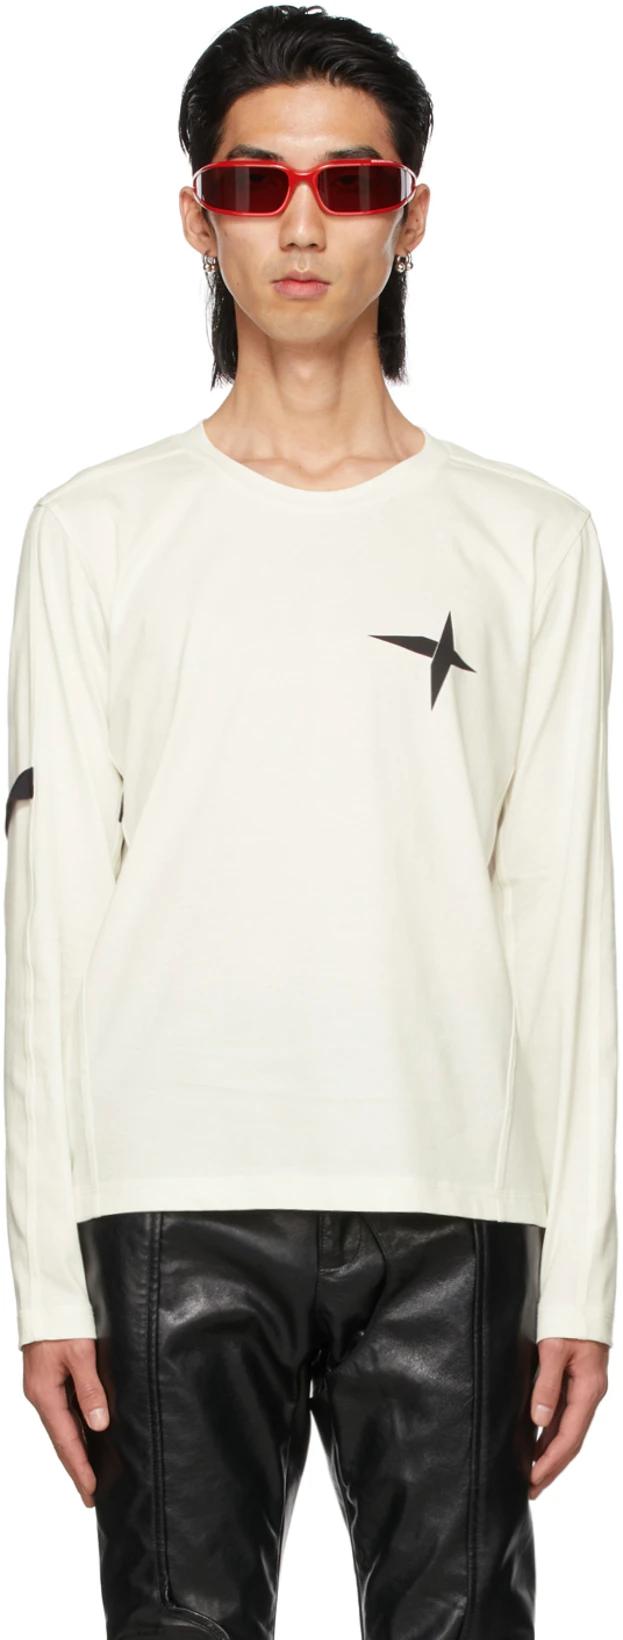 SSENSE Exclusive White Armband Long Sleeve T-Shirt by ADYAR